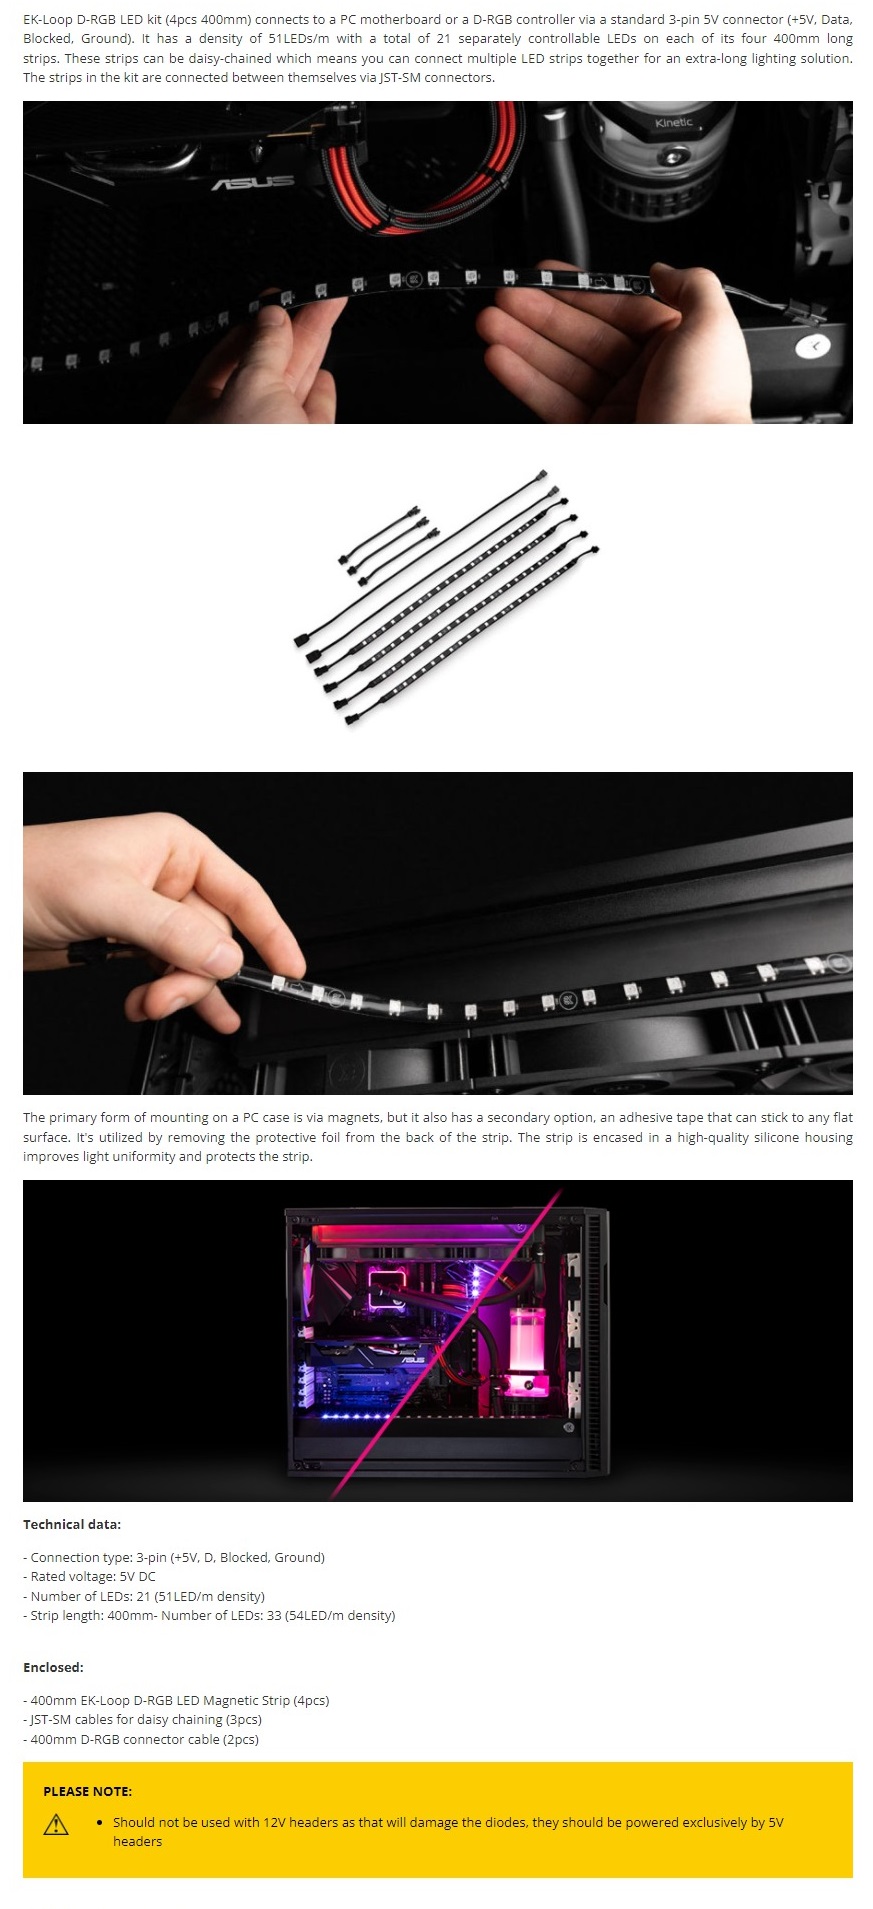 A large marketing image providing additional information about the product EK Loop D-RGB LED Magnetic Kit (4pcs 400mm) - Additional alt info not provided